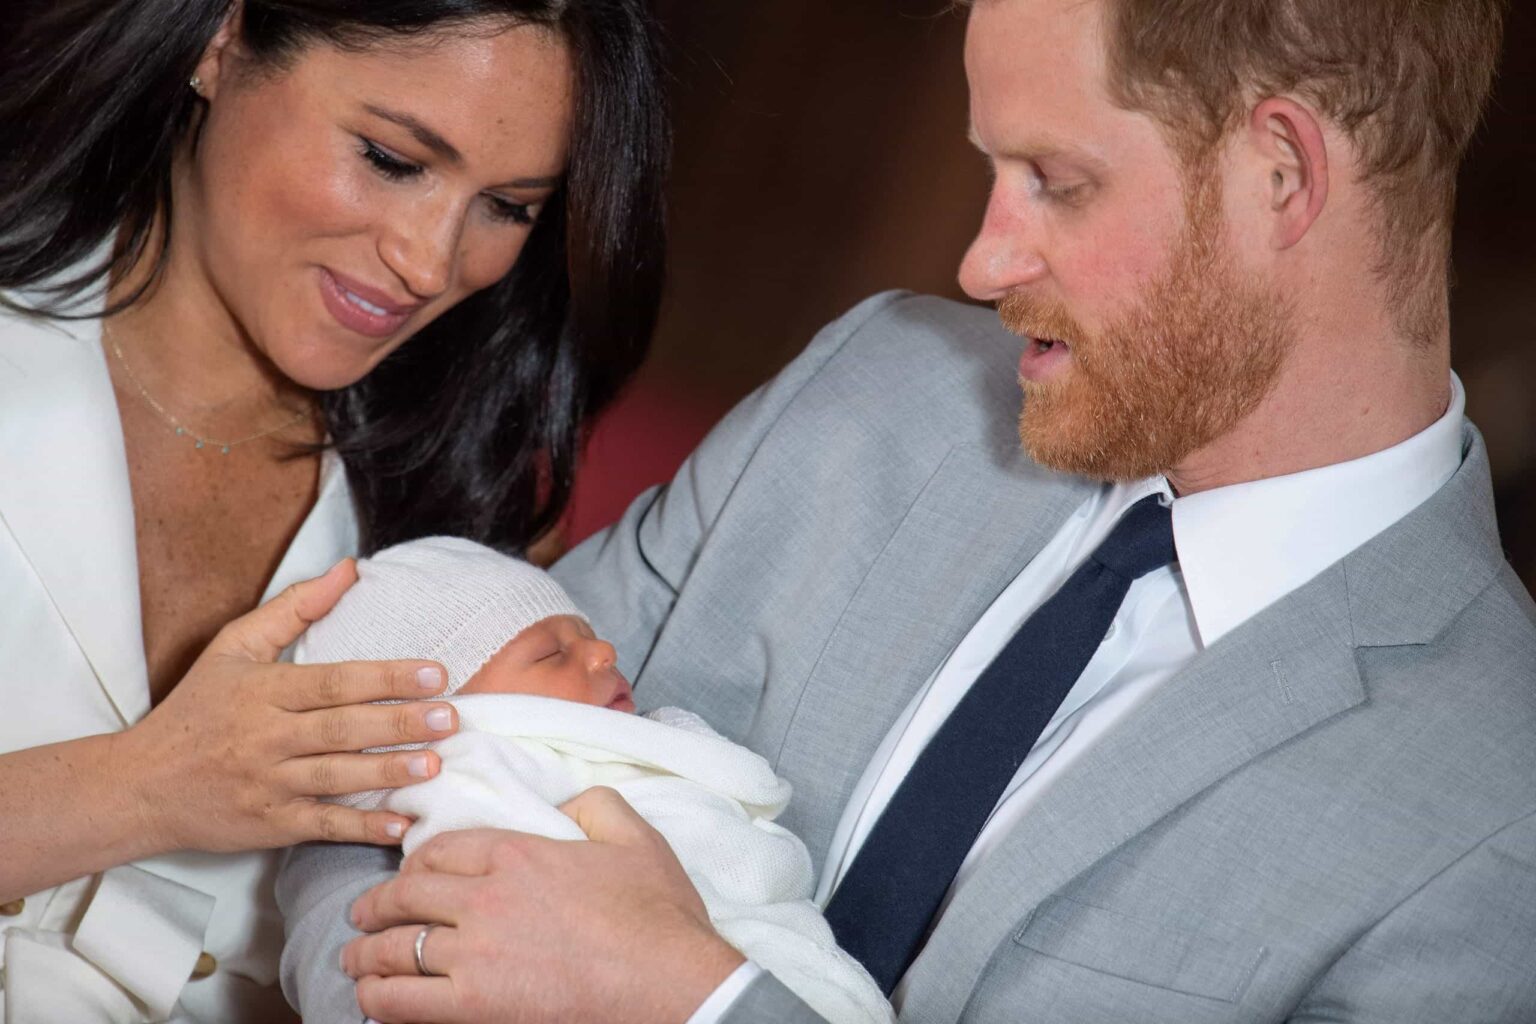 Prince Harry and Meghan Markle like their privacy. Discover how they’ve kept their son Archie out of the spotlight.